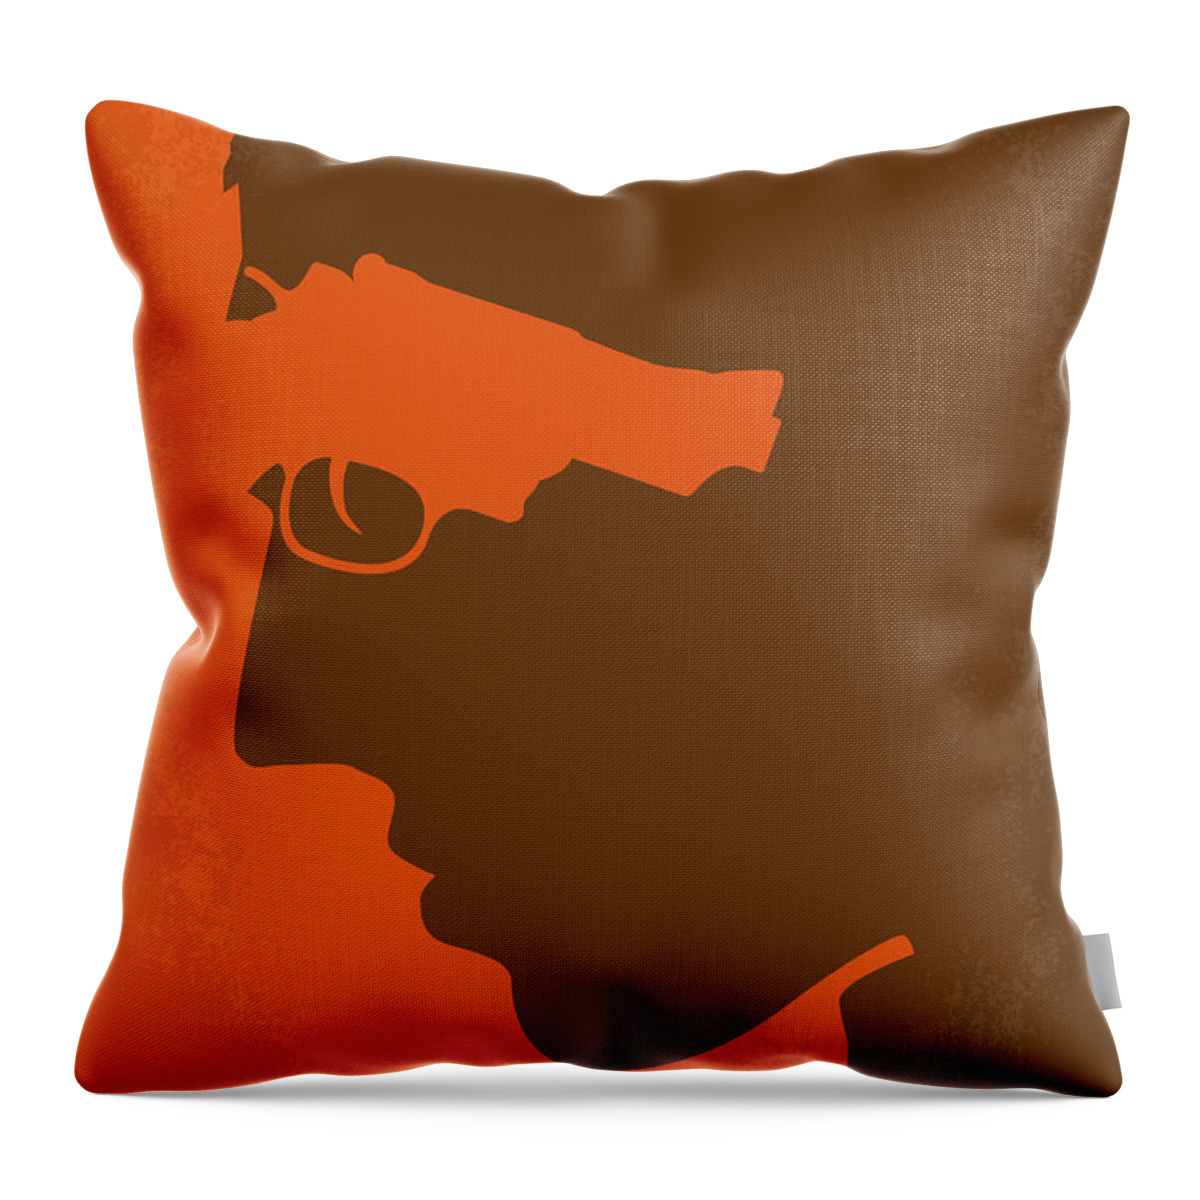 La Haine Throw Pillow featuring the digital art No734 My La Haine minimal movie poster by Chungkong Art